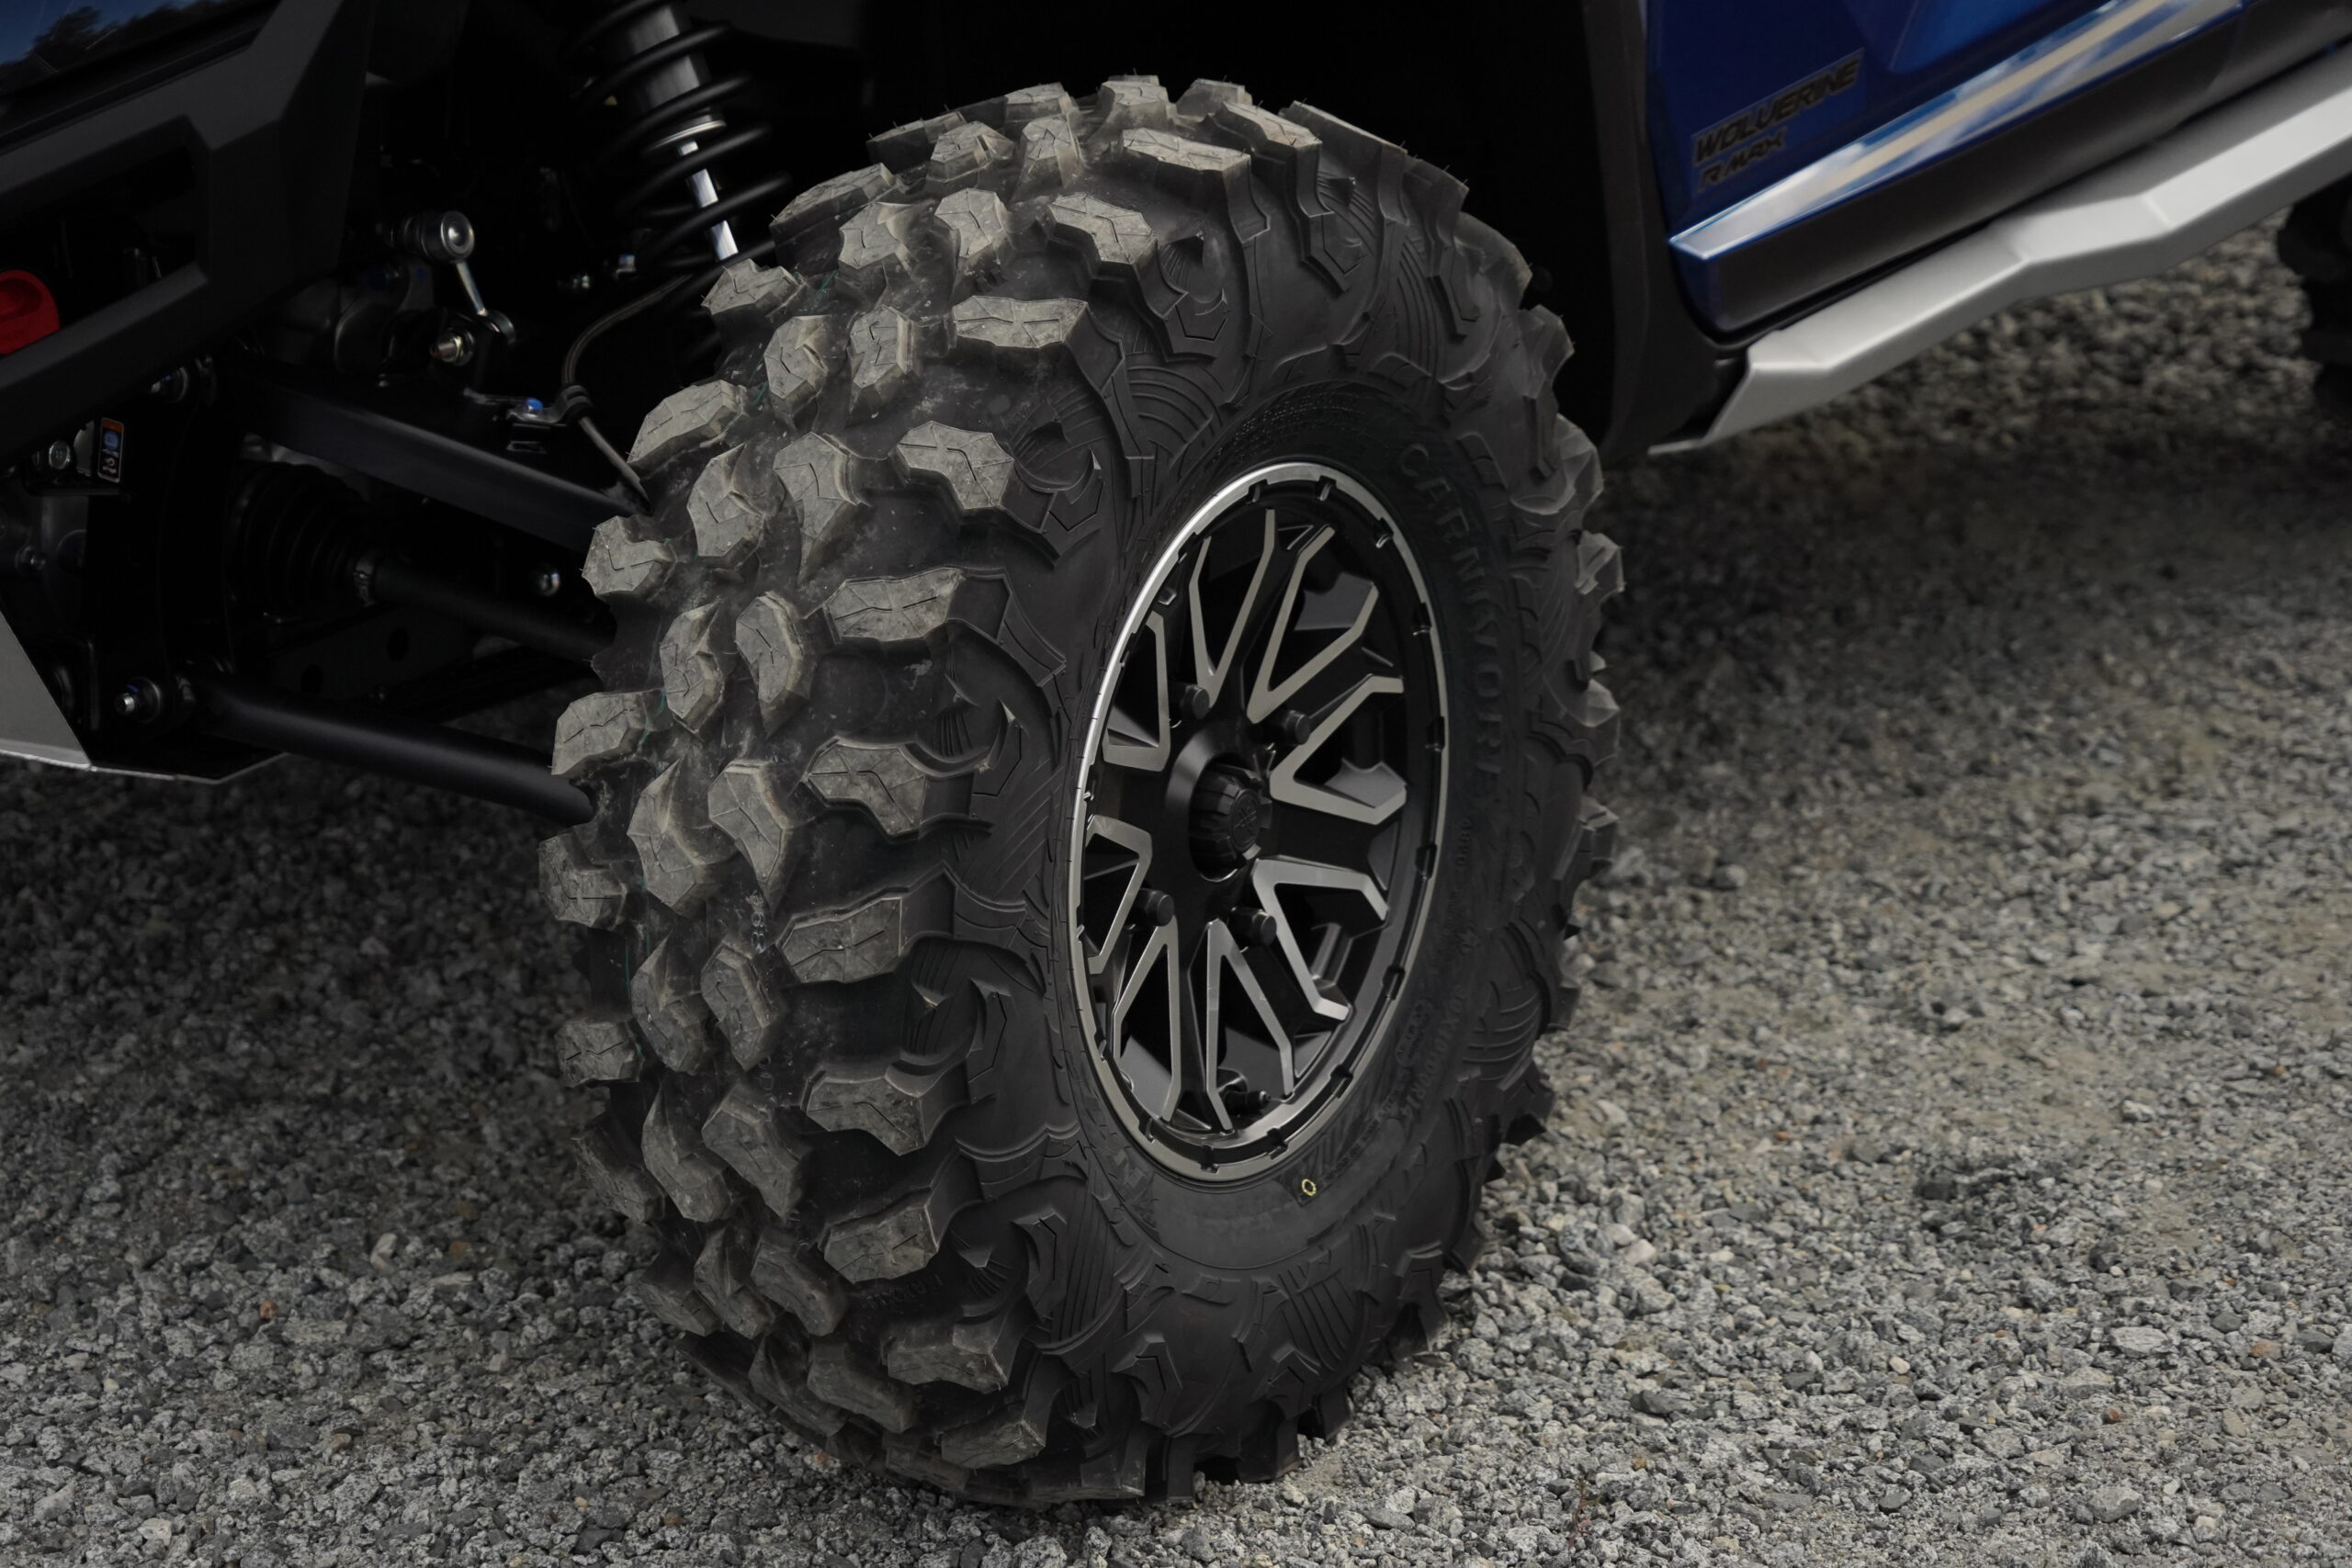 You won't need to buy aftermarket tires for the RMax.